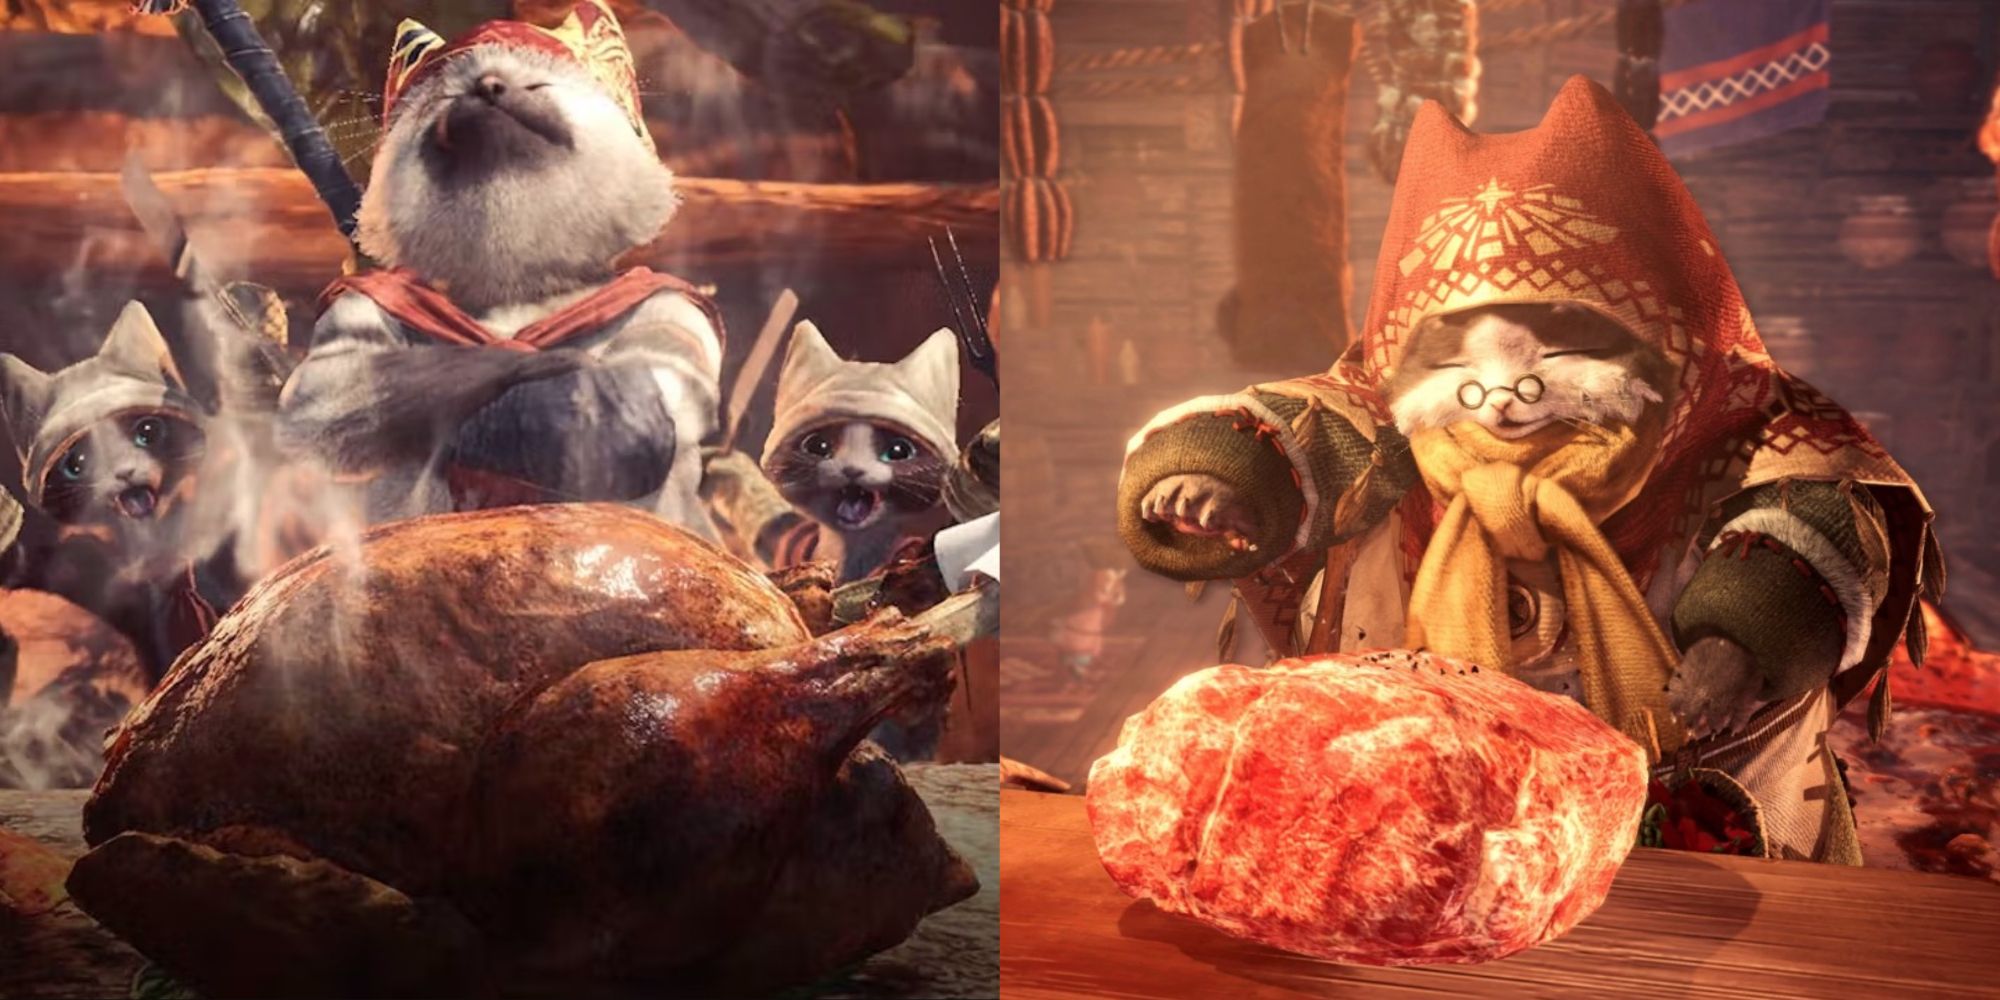 The Meowscular Chef proud of his turkey, Grammeowster Chef lovingly seasoning some meat